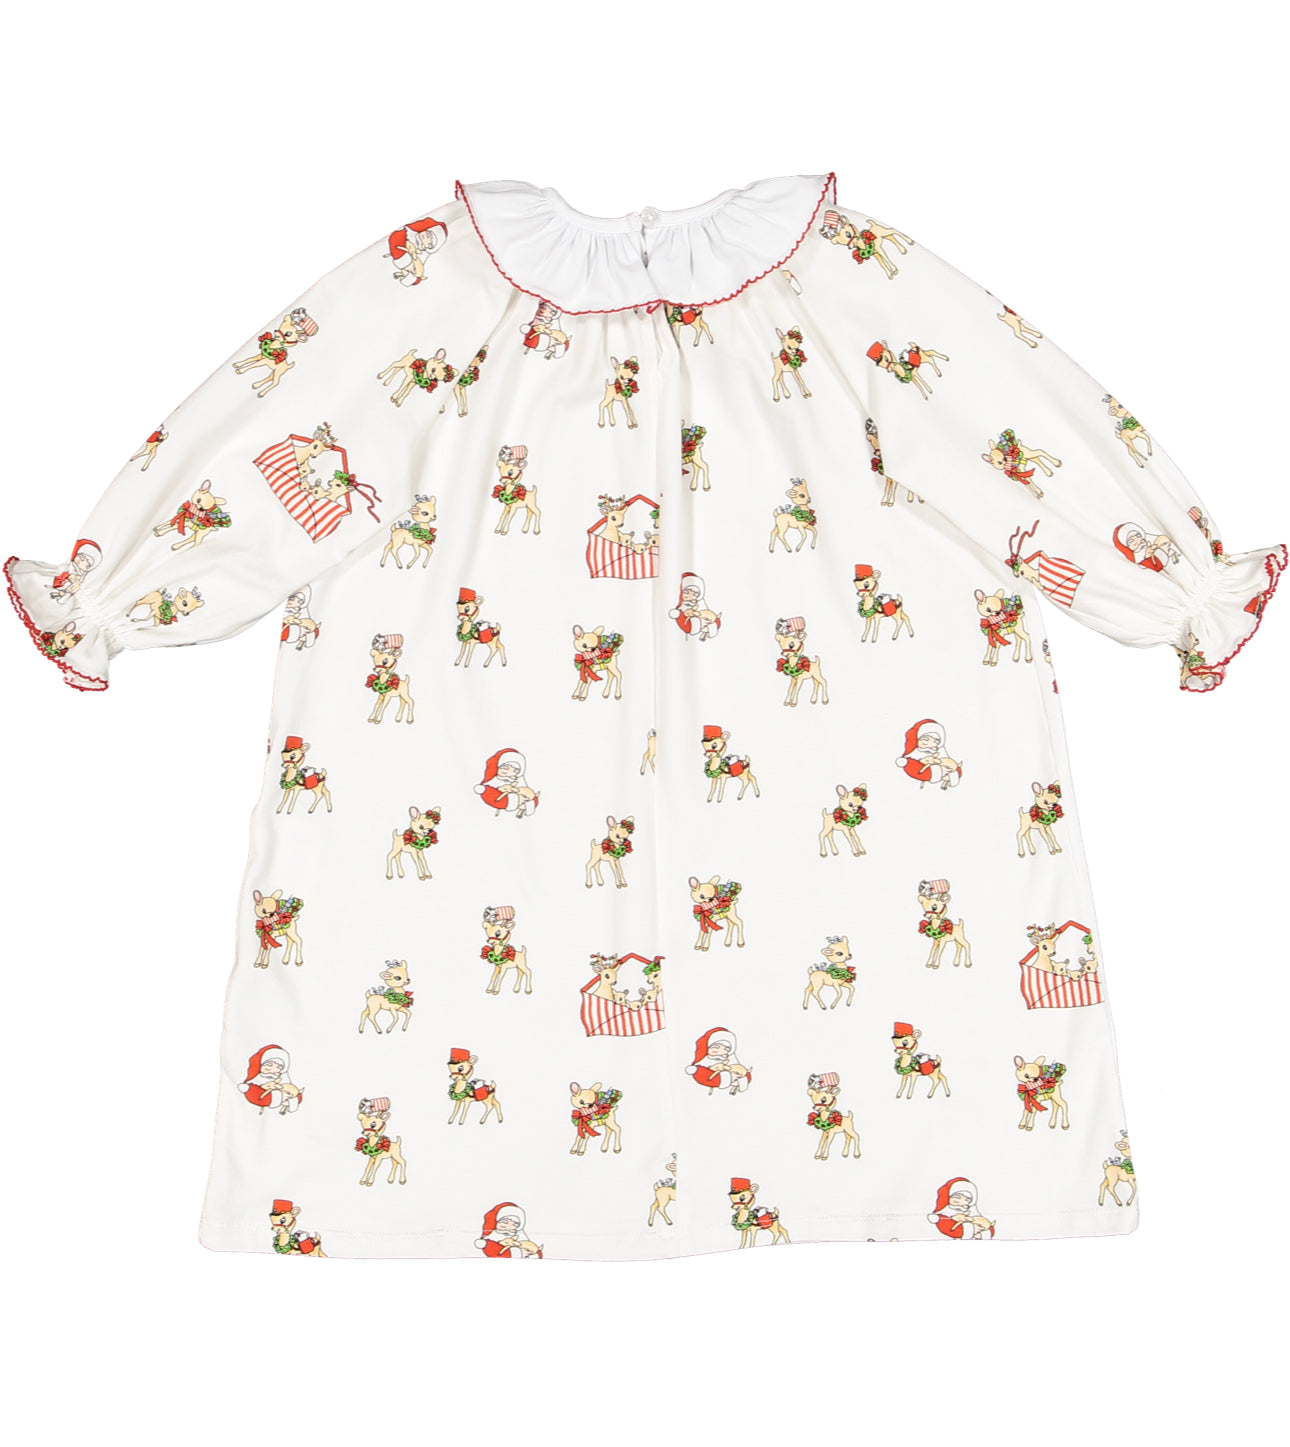 Letters to Santa Girl Nightgown (5T)